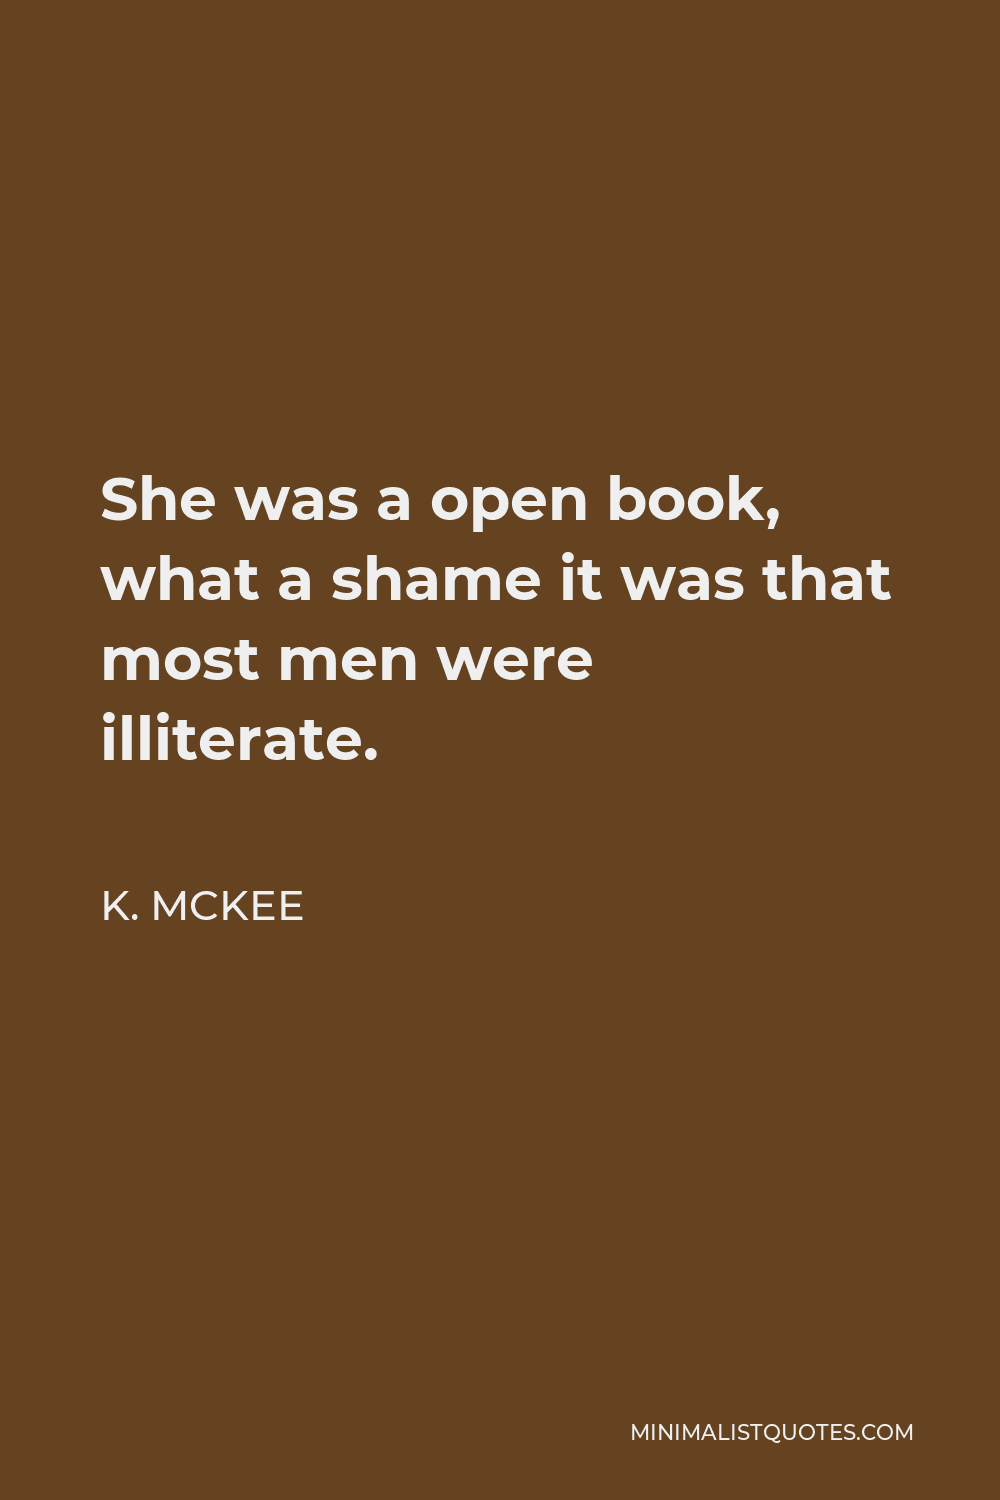 K. Mckee Quote - She was a open book, what a shame it was that most men were illiterate.